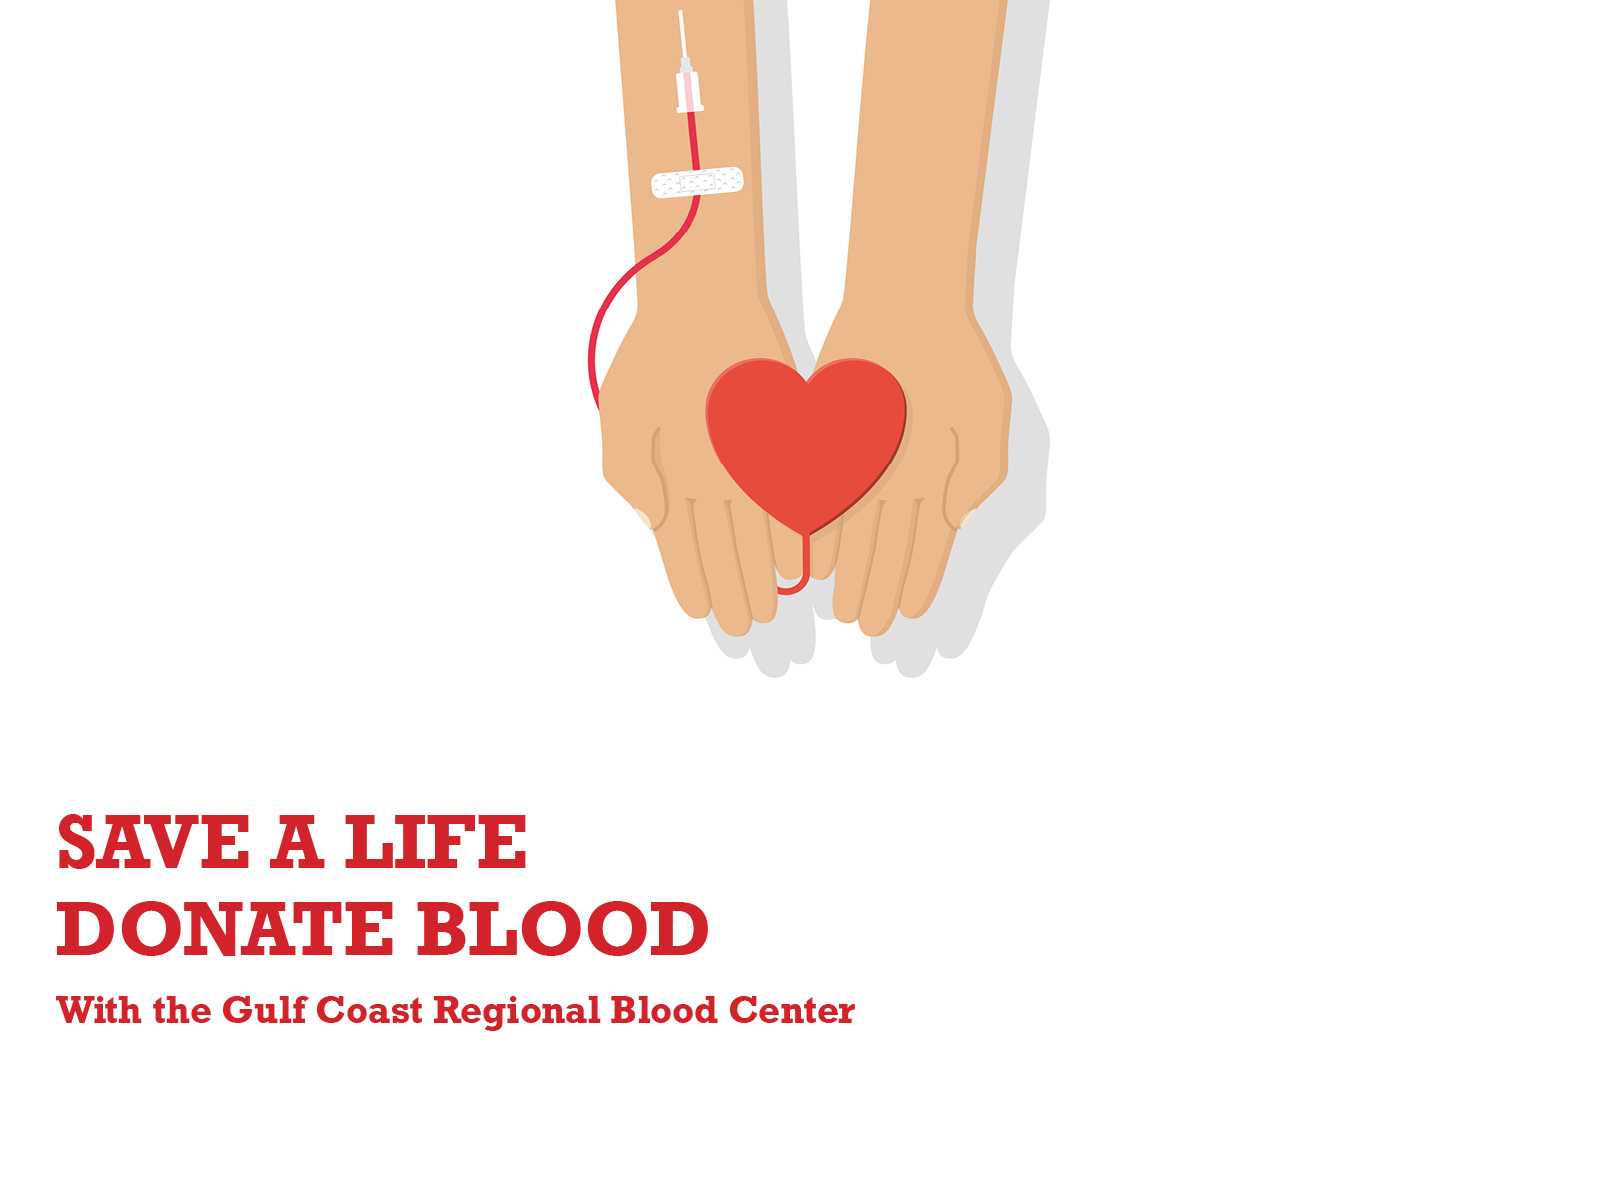 Illustration of hand holding a heart discussing blood donation and saving a life